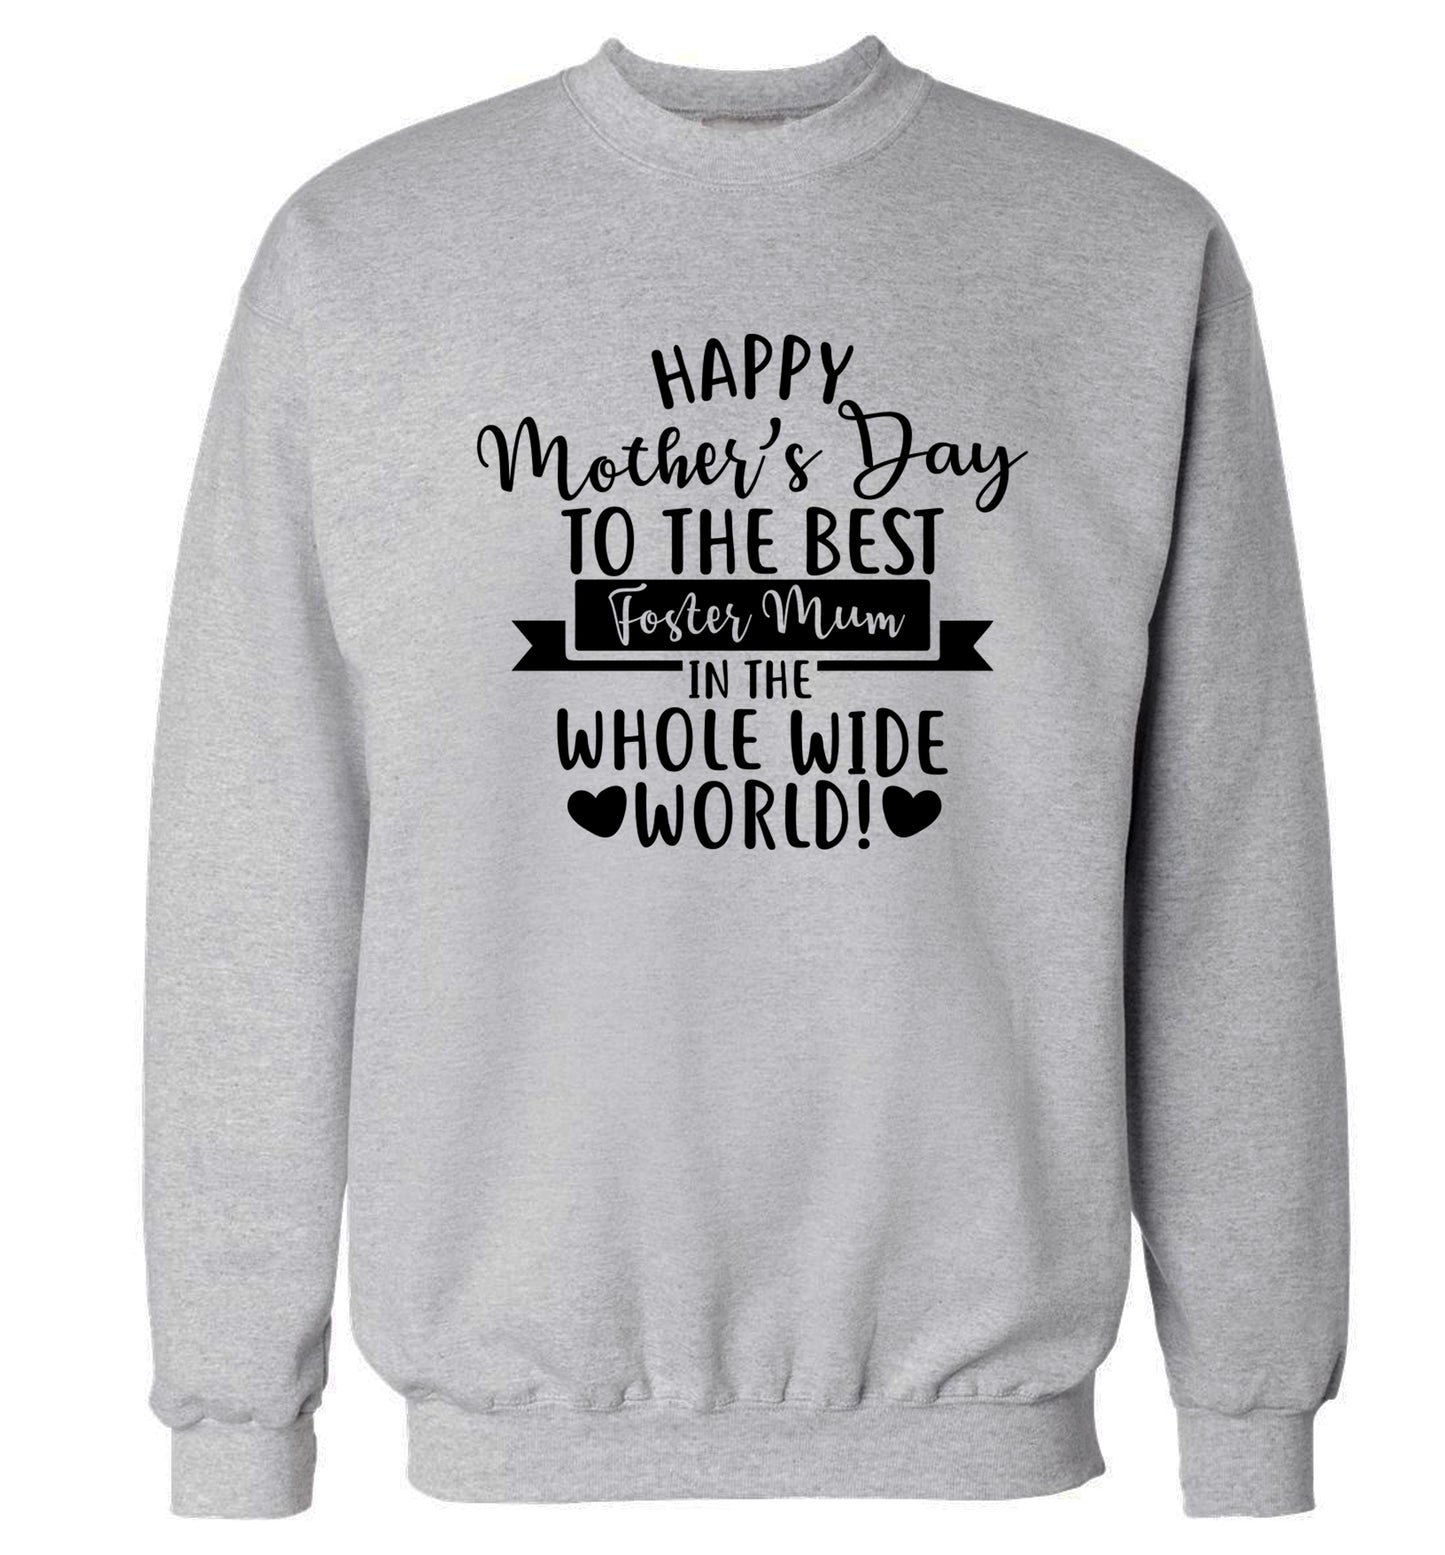 Happy mother's day to the best foster mum in the world Adult's unisex grey Sweater 2XL